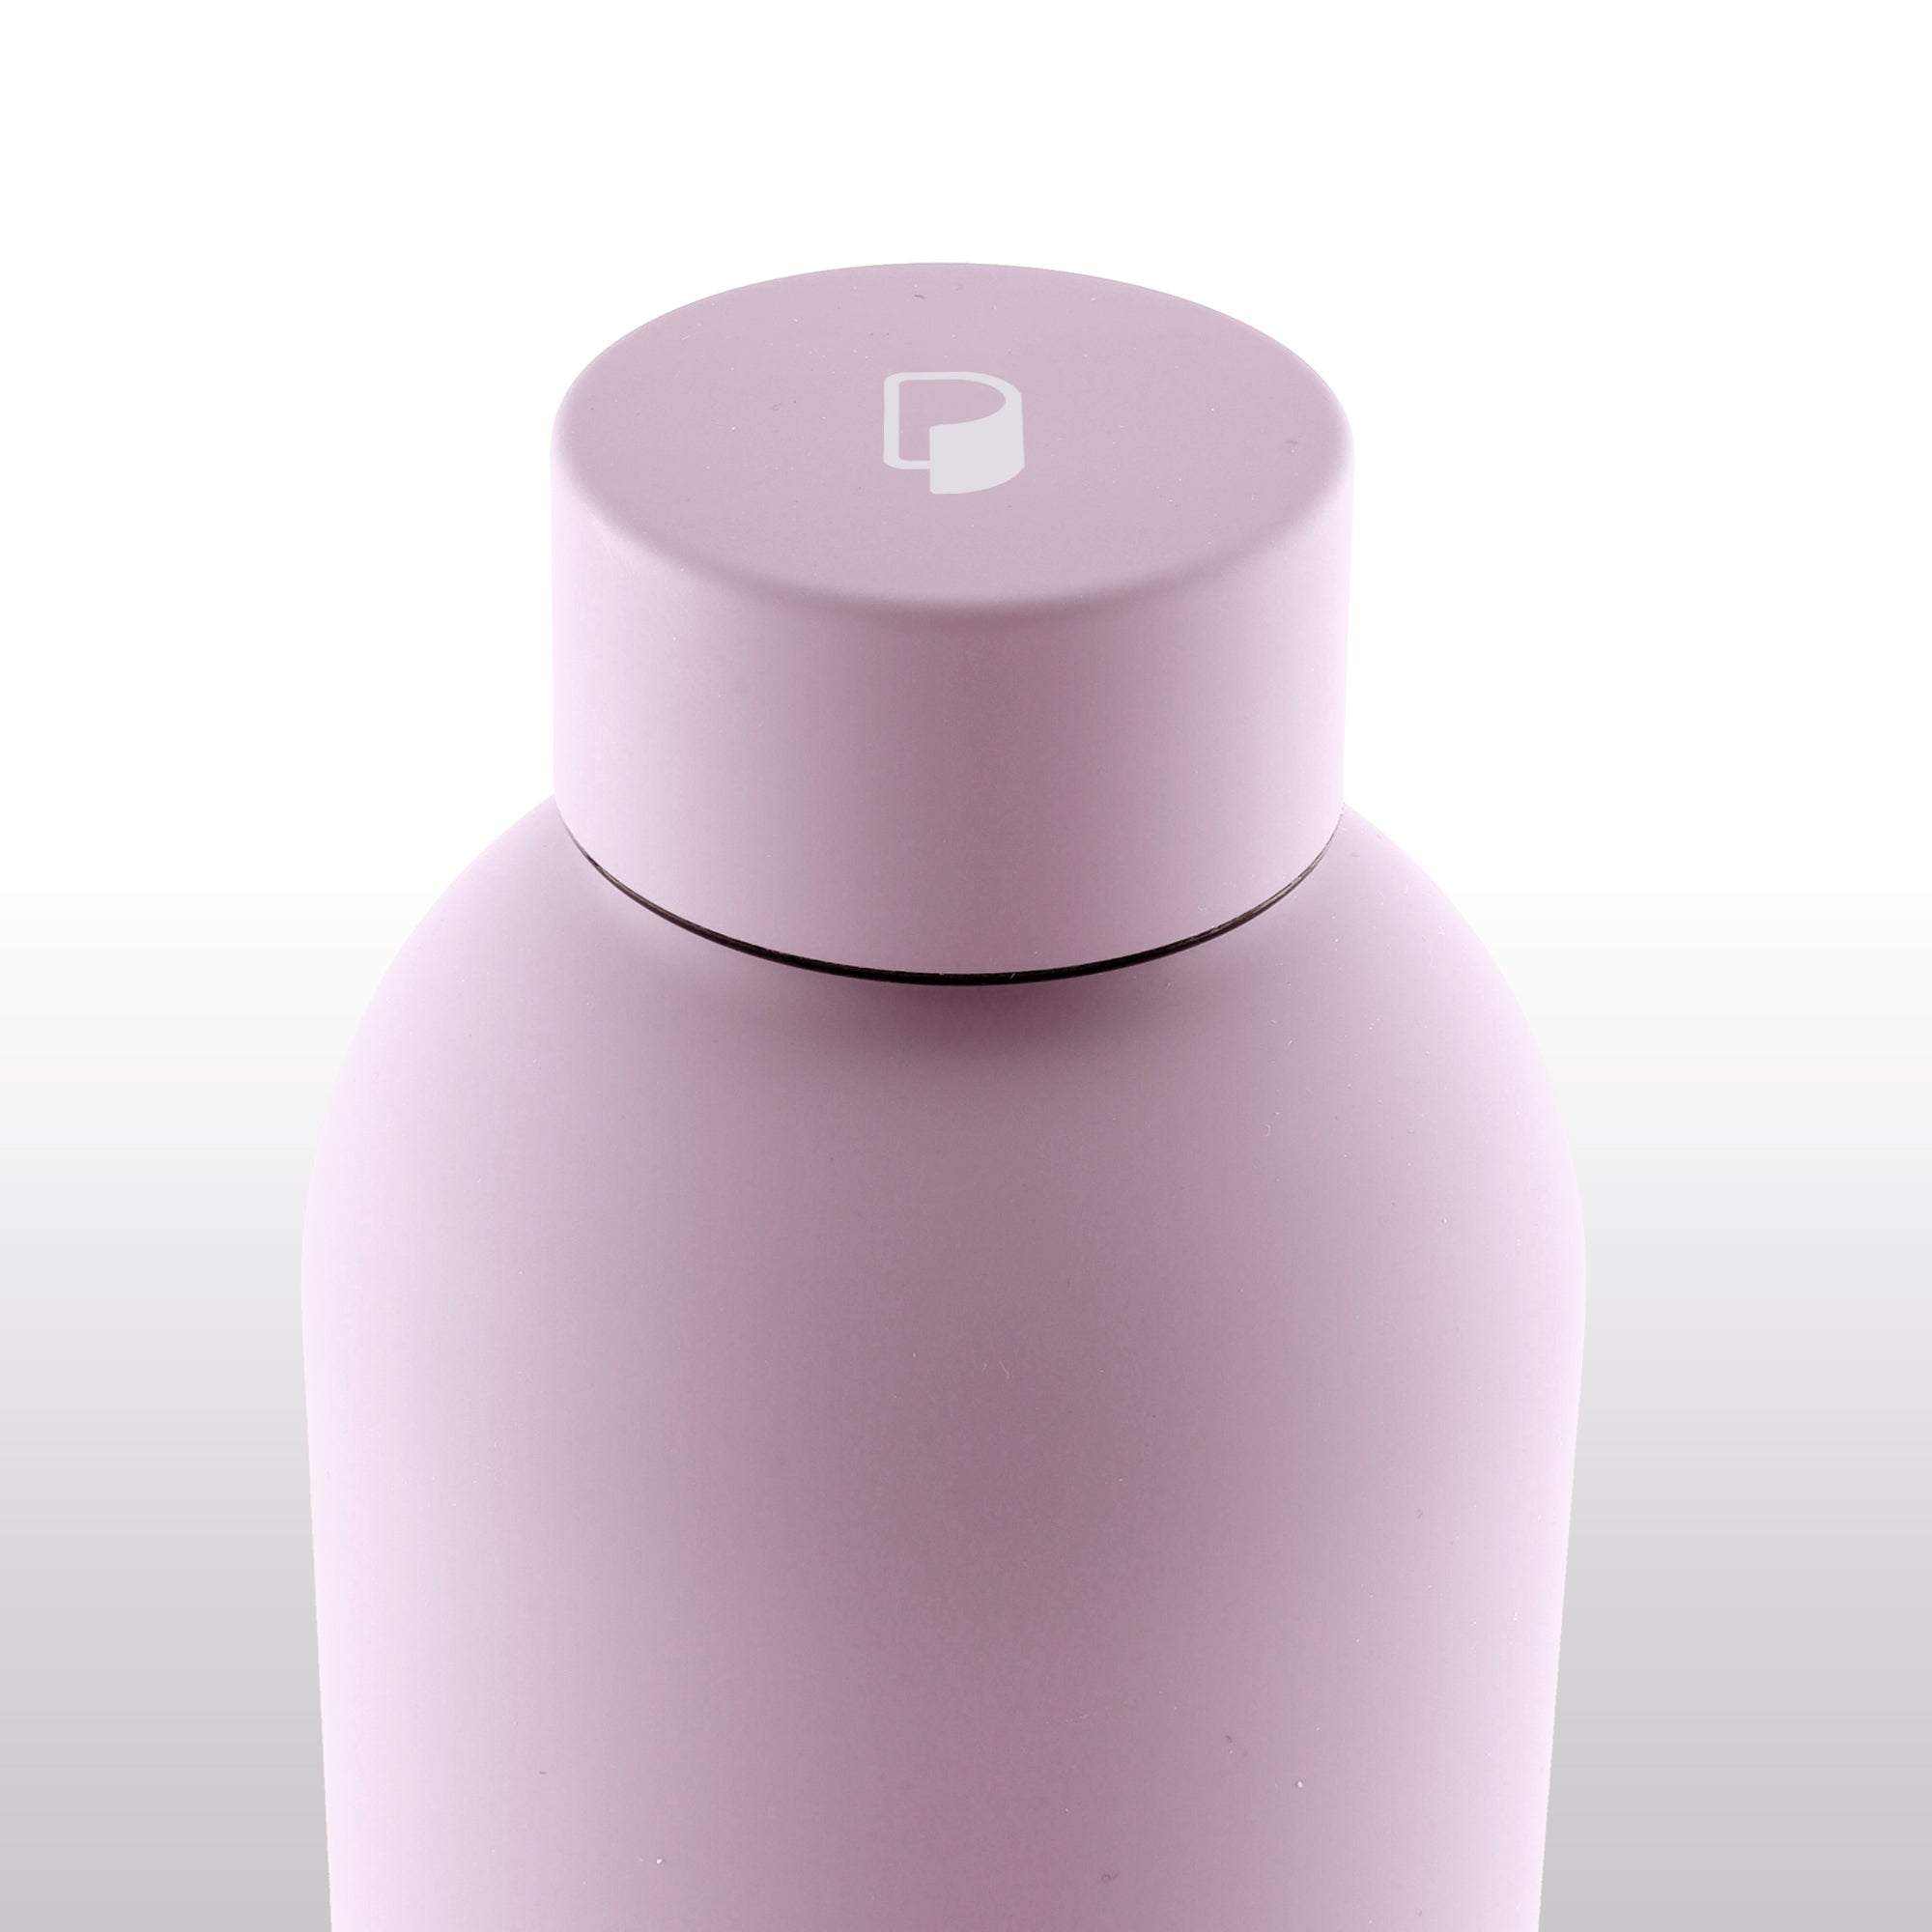 thermalBottle [Lilac] (500ml)